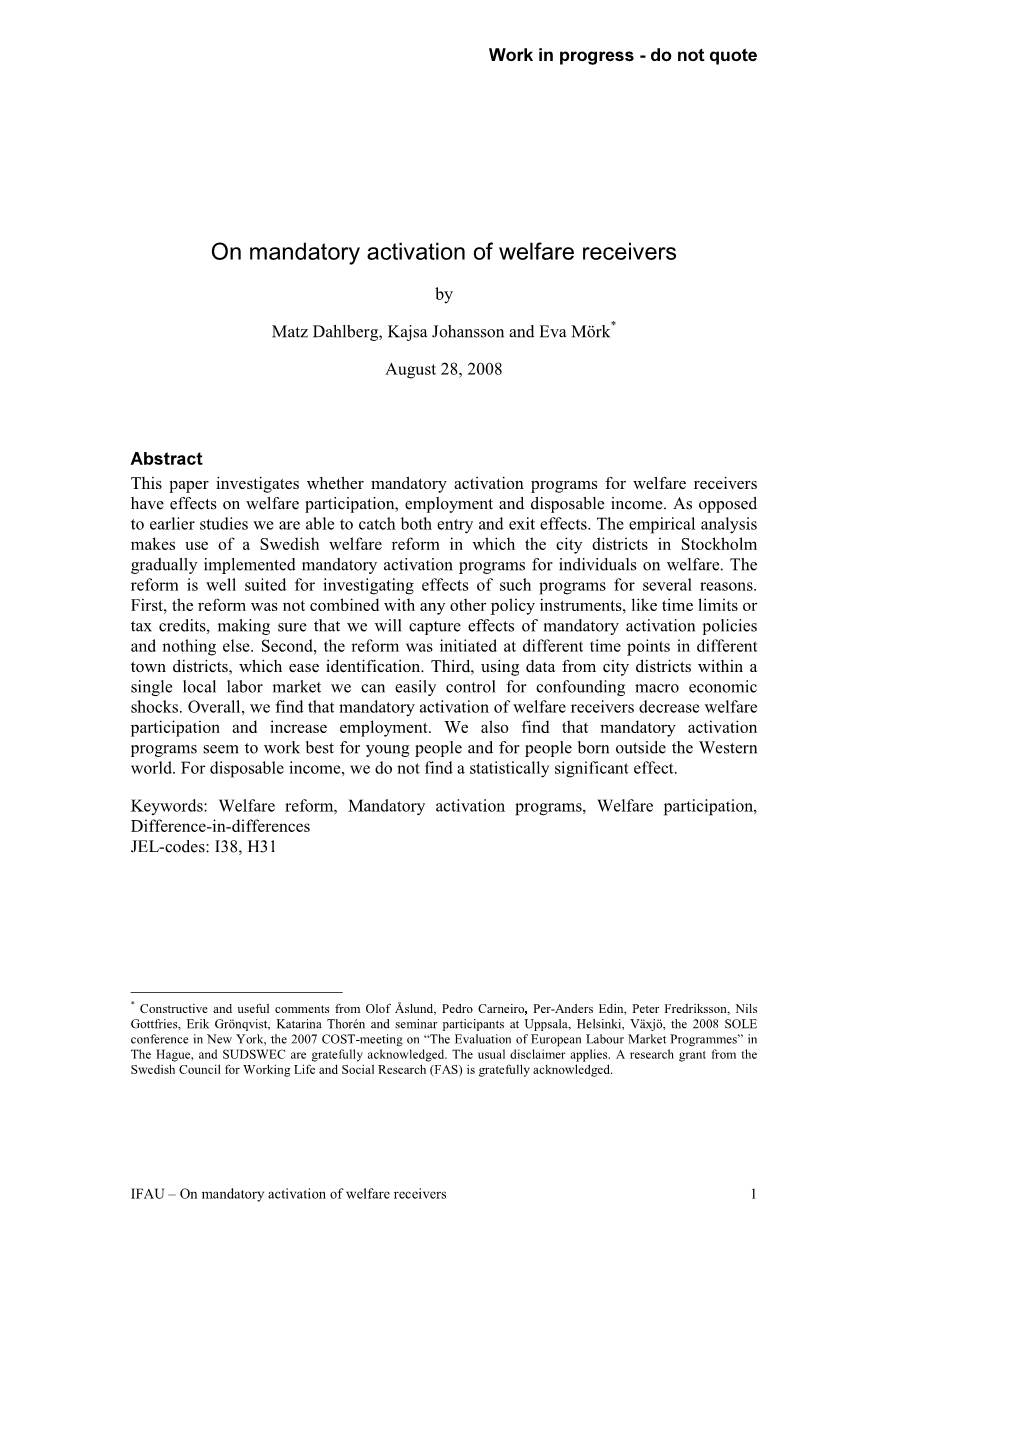 On Mandatory Activation of Welfare Receivers By